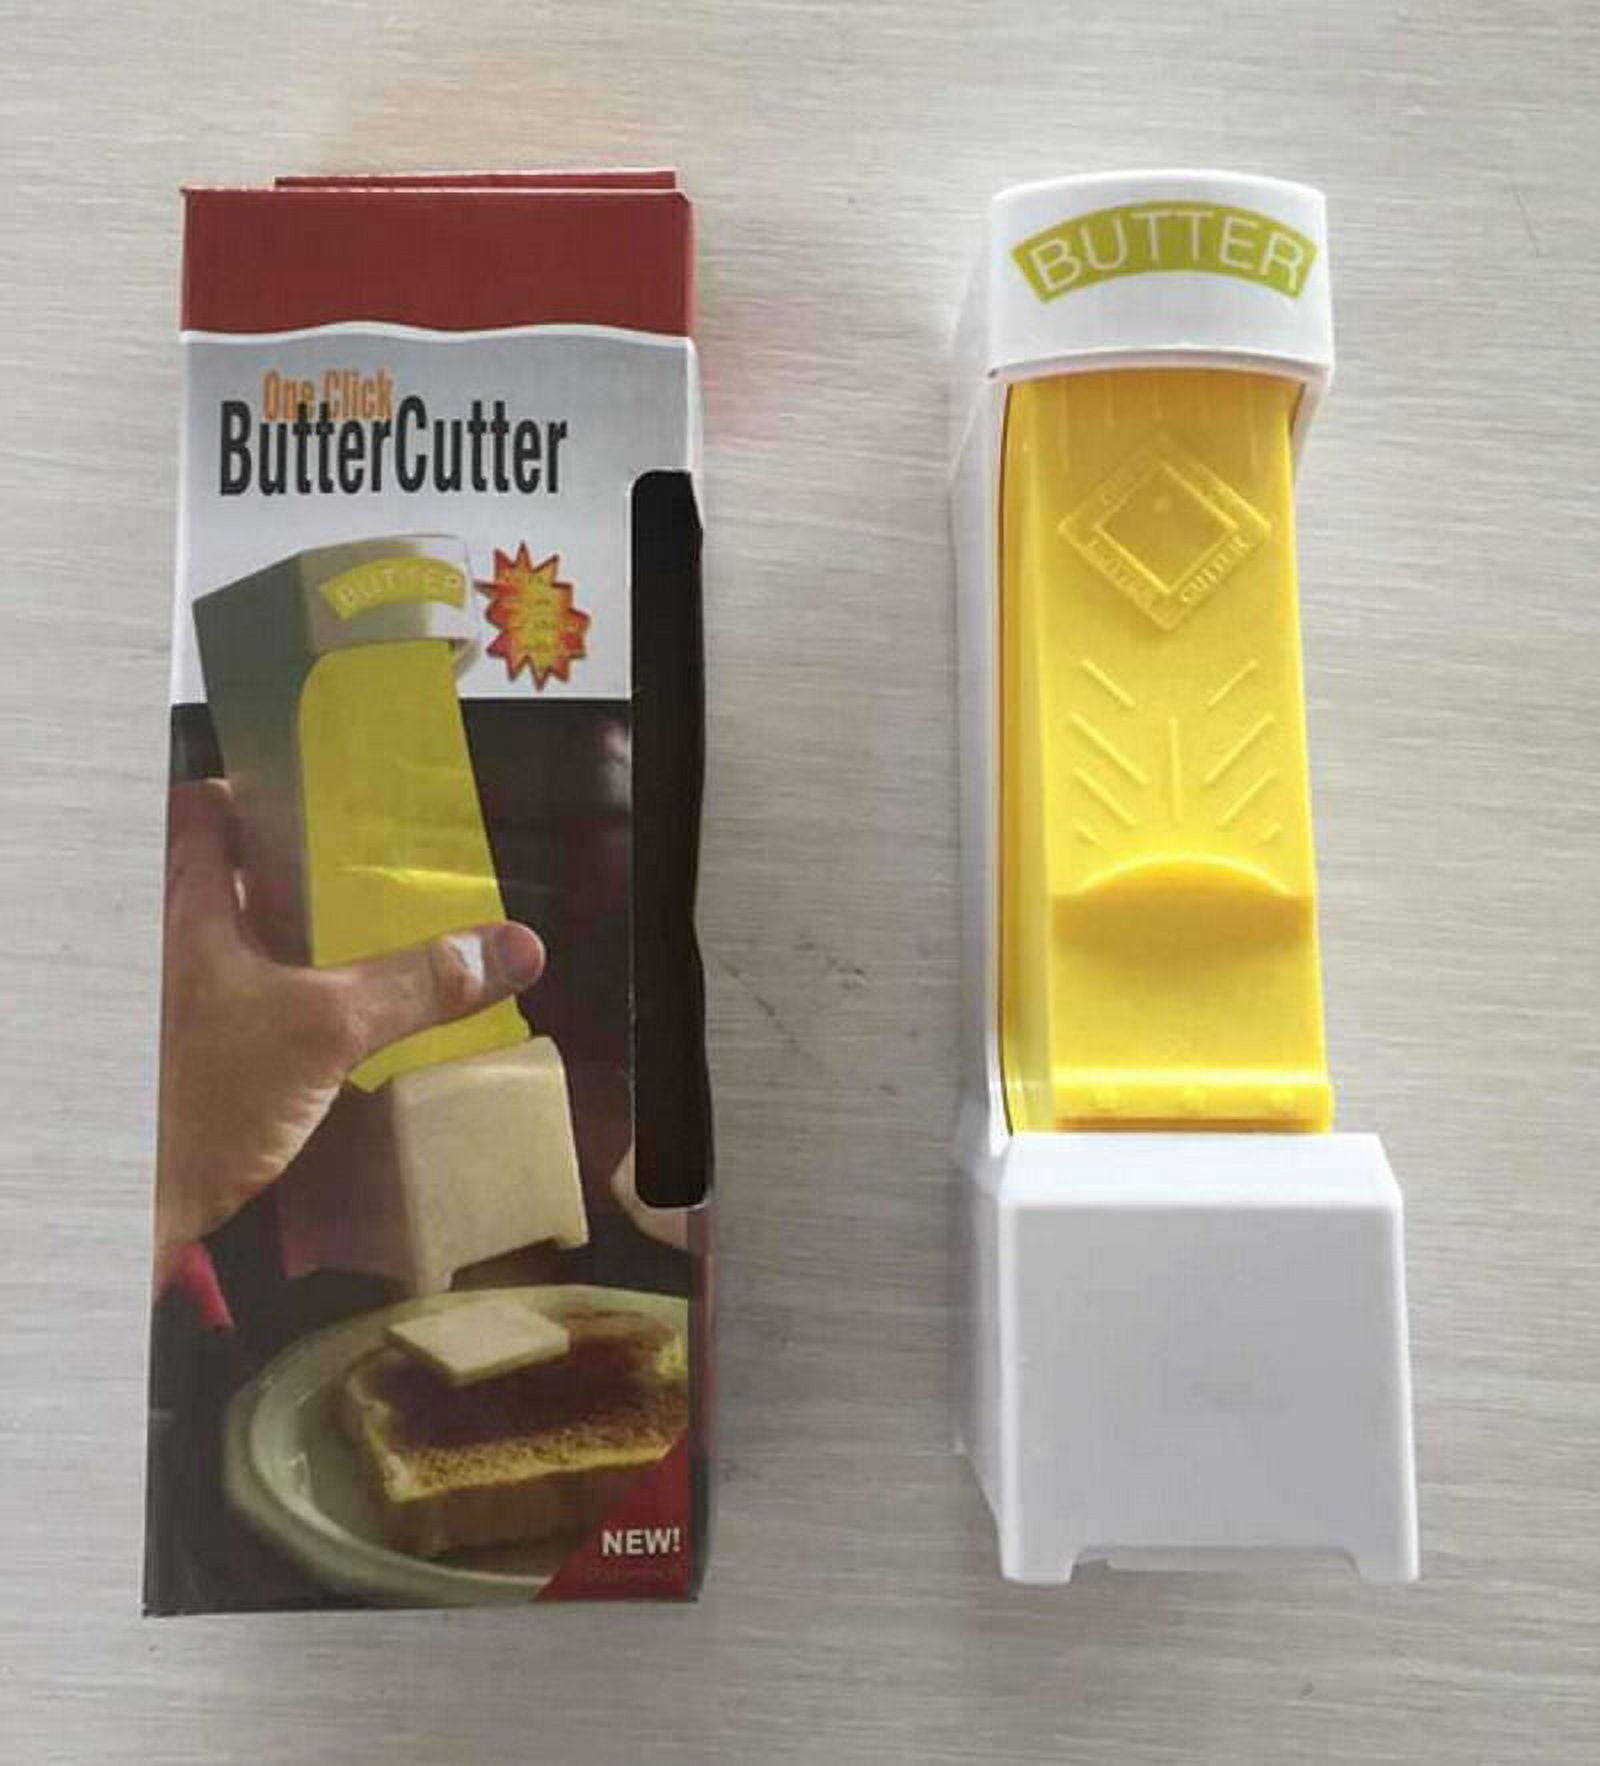 Jeashchat Butter Cutter Clearance, One Click Butter Slicer, Cheese Splitter, Butter Dispenser, Butter Slicing Tool for Making Bread Cakes Cookies